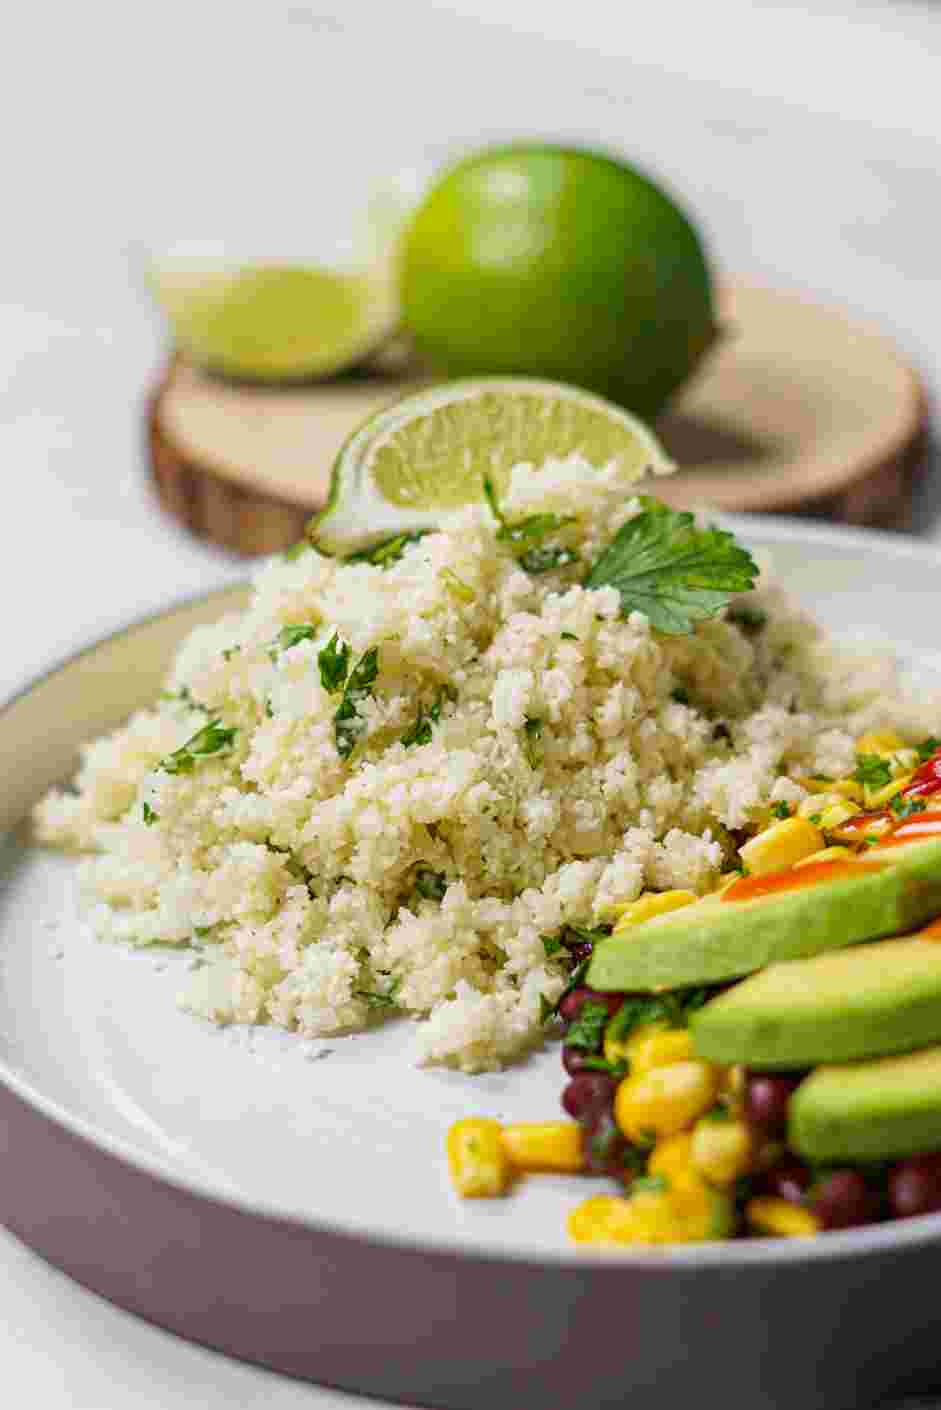 Cilantro Lime Cauliflower Rice Recipe: Serve immediately paired with your favorite Mexican dish.